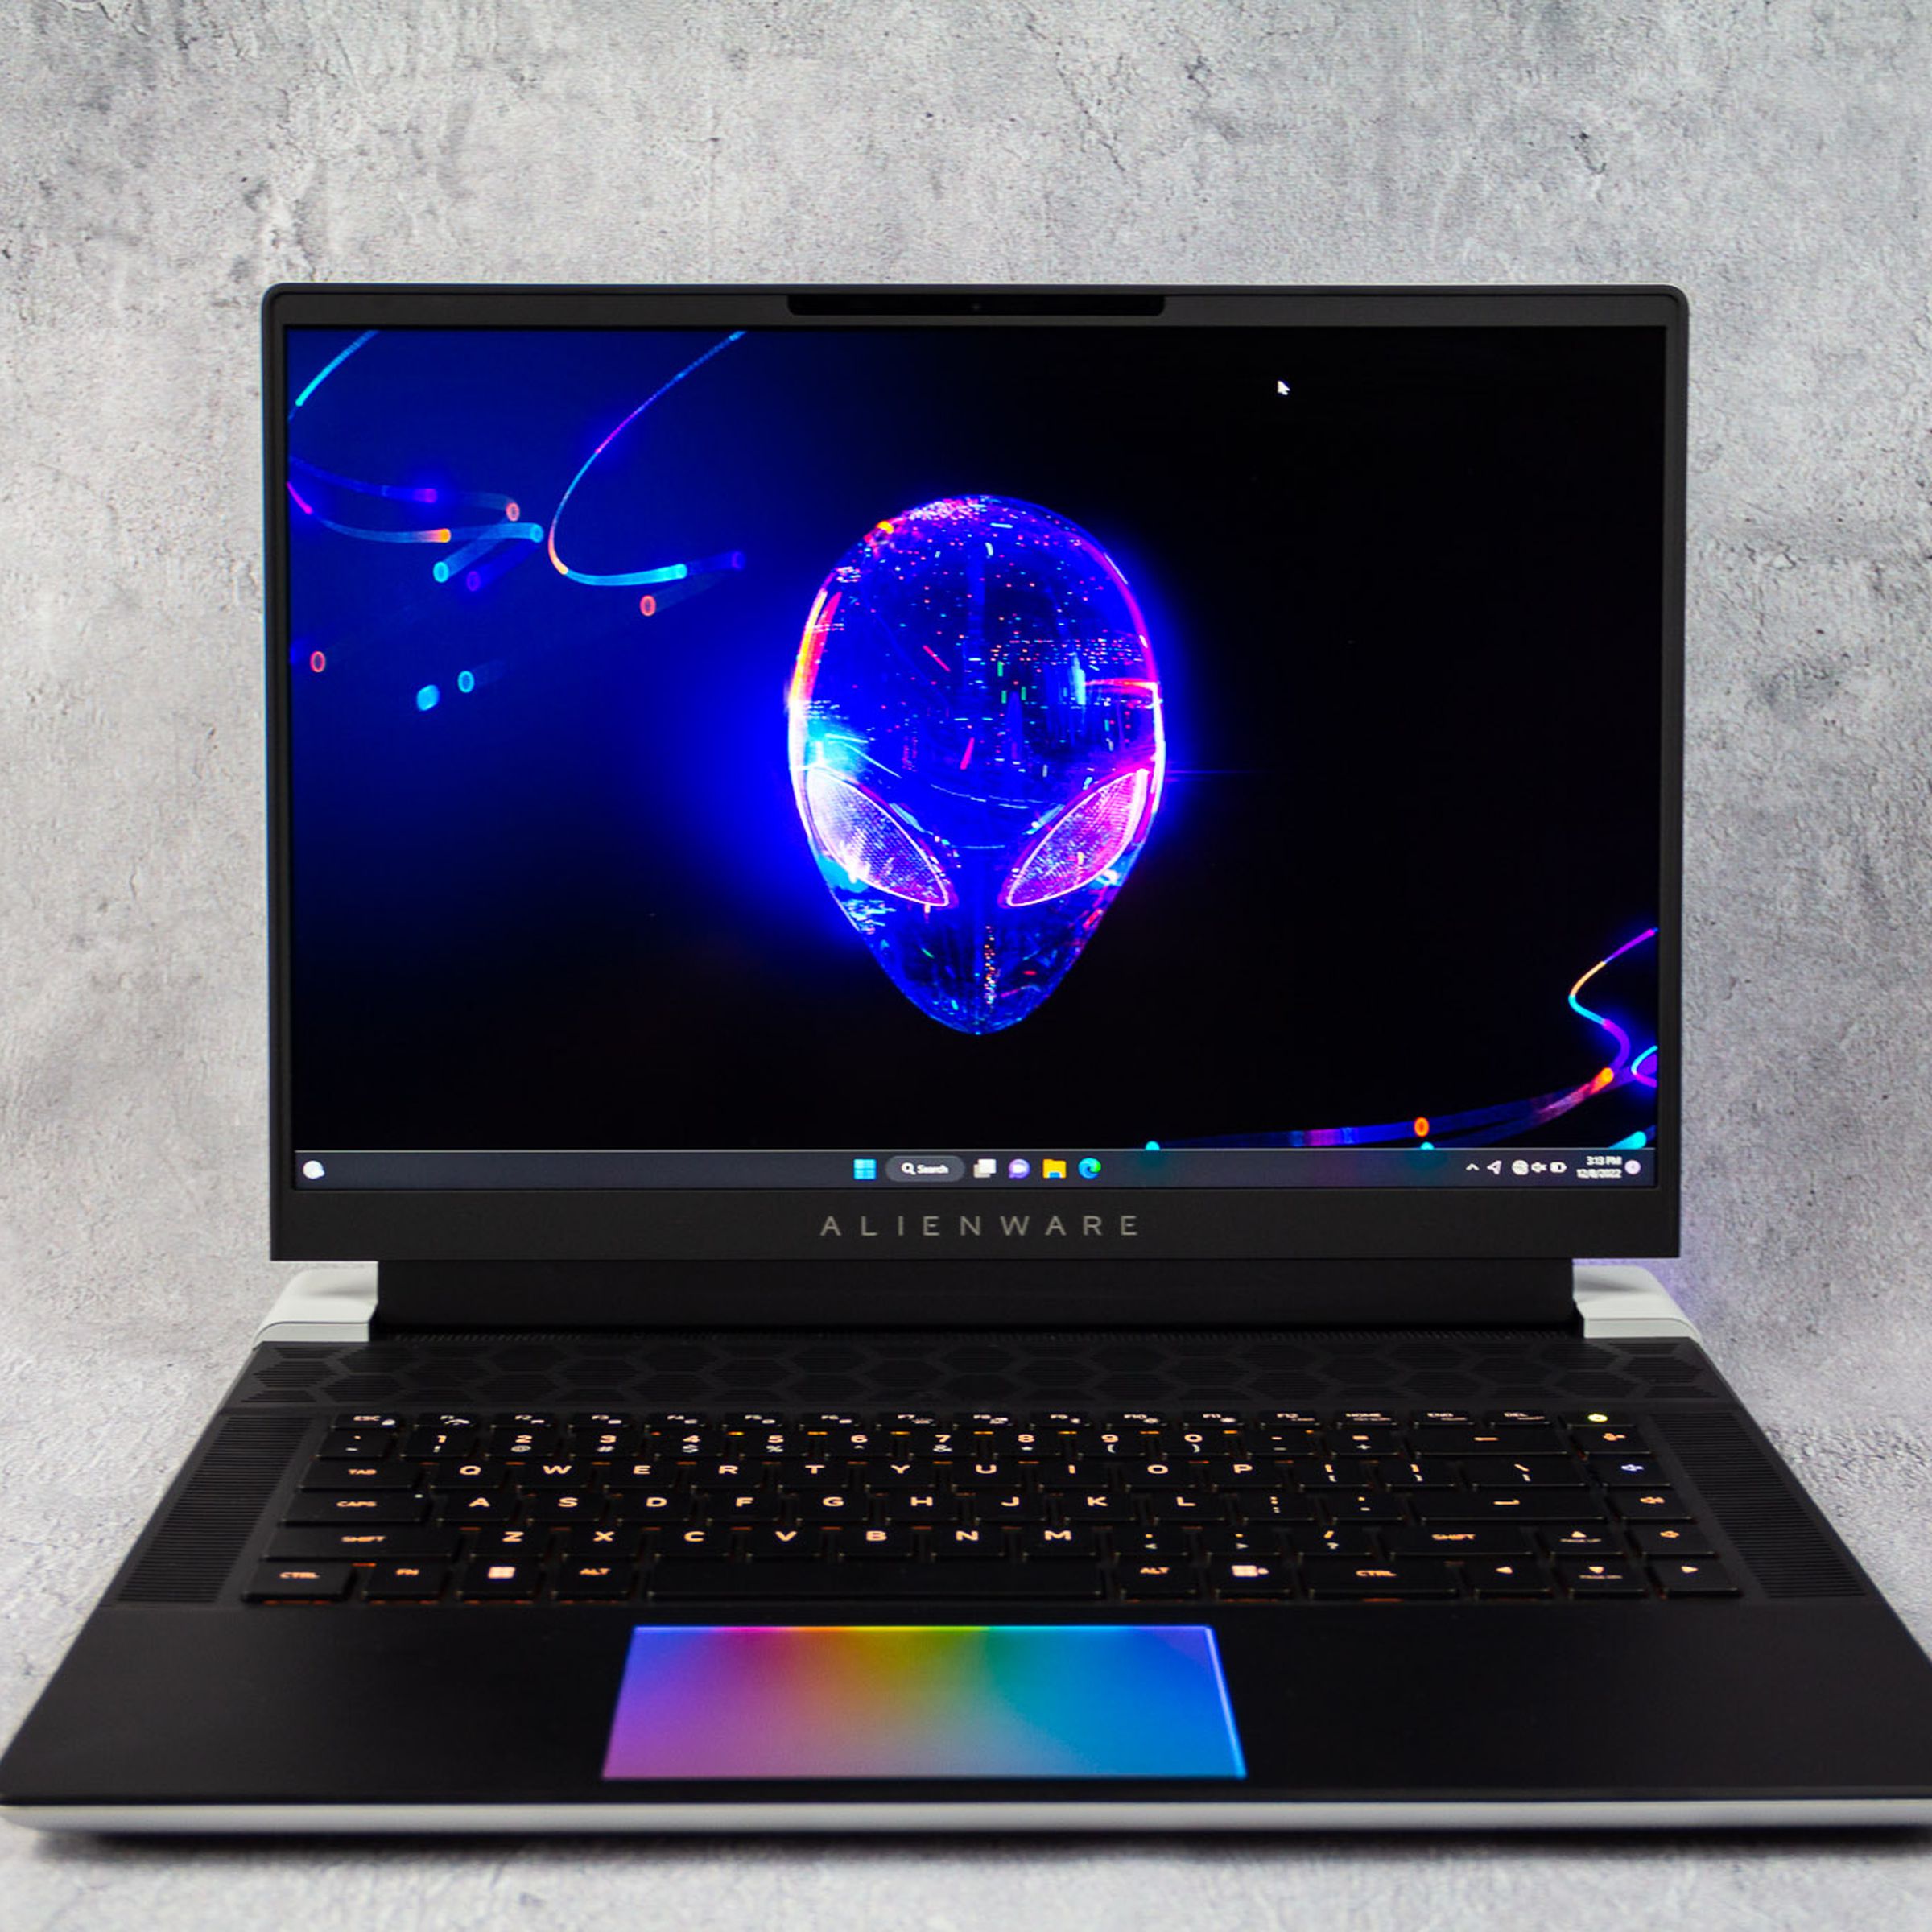 Alienware’s X16 16-inch gaming laptop with its display opened to reveal a multi-colored trackpad.